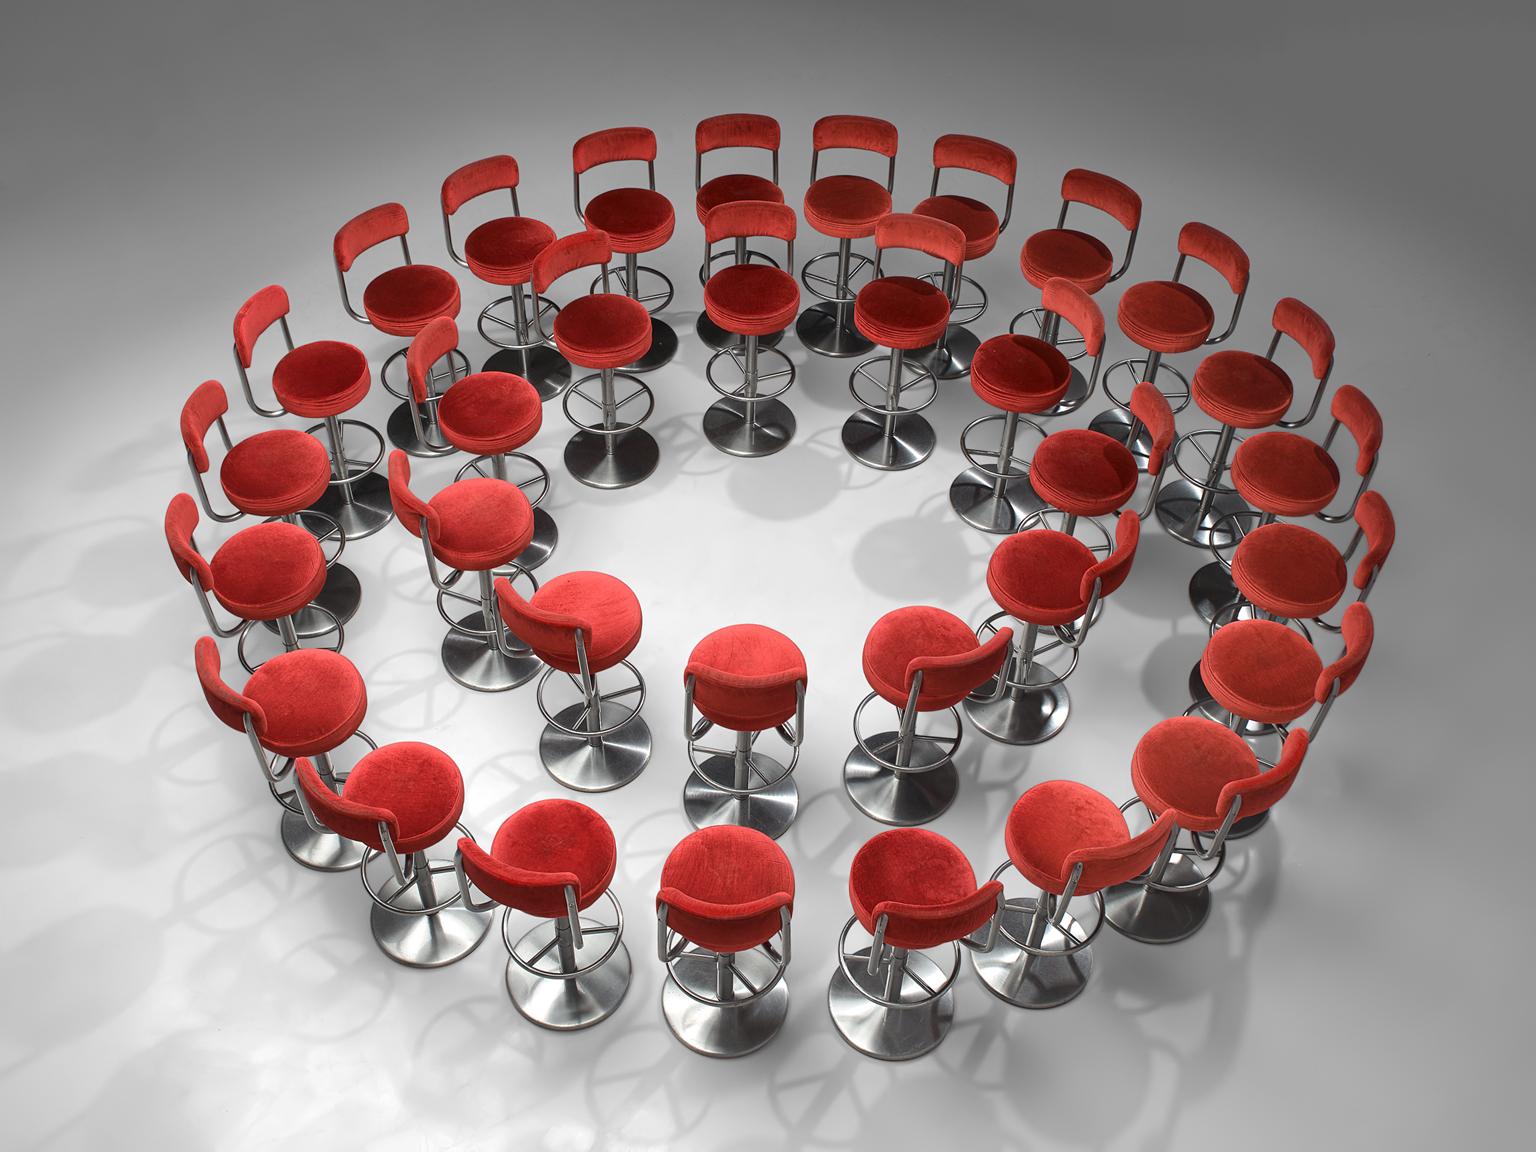 Borje Johanson for Johanson Design, set of thirty barstools as part of 'Johanson Jupiter Collection', in metal and red velvet, Sweden, 1970s.

Highly comfortable high barstools in red velvet upholstery. Due to the soft seat and back, these chairs